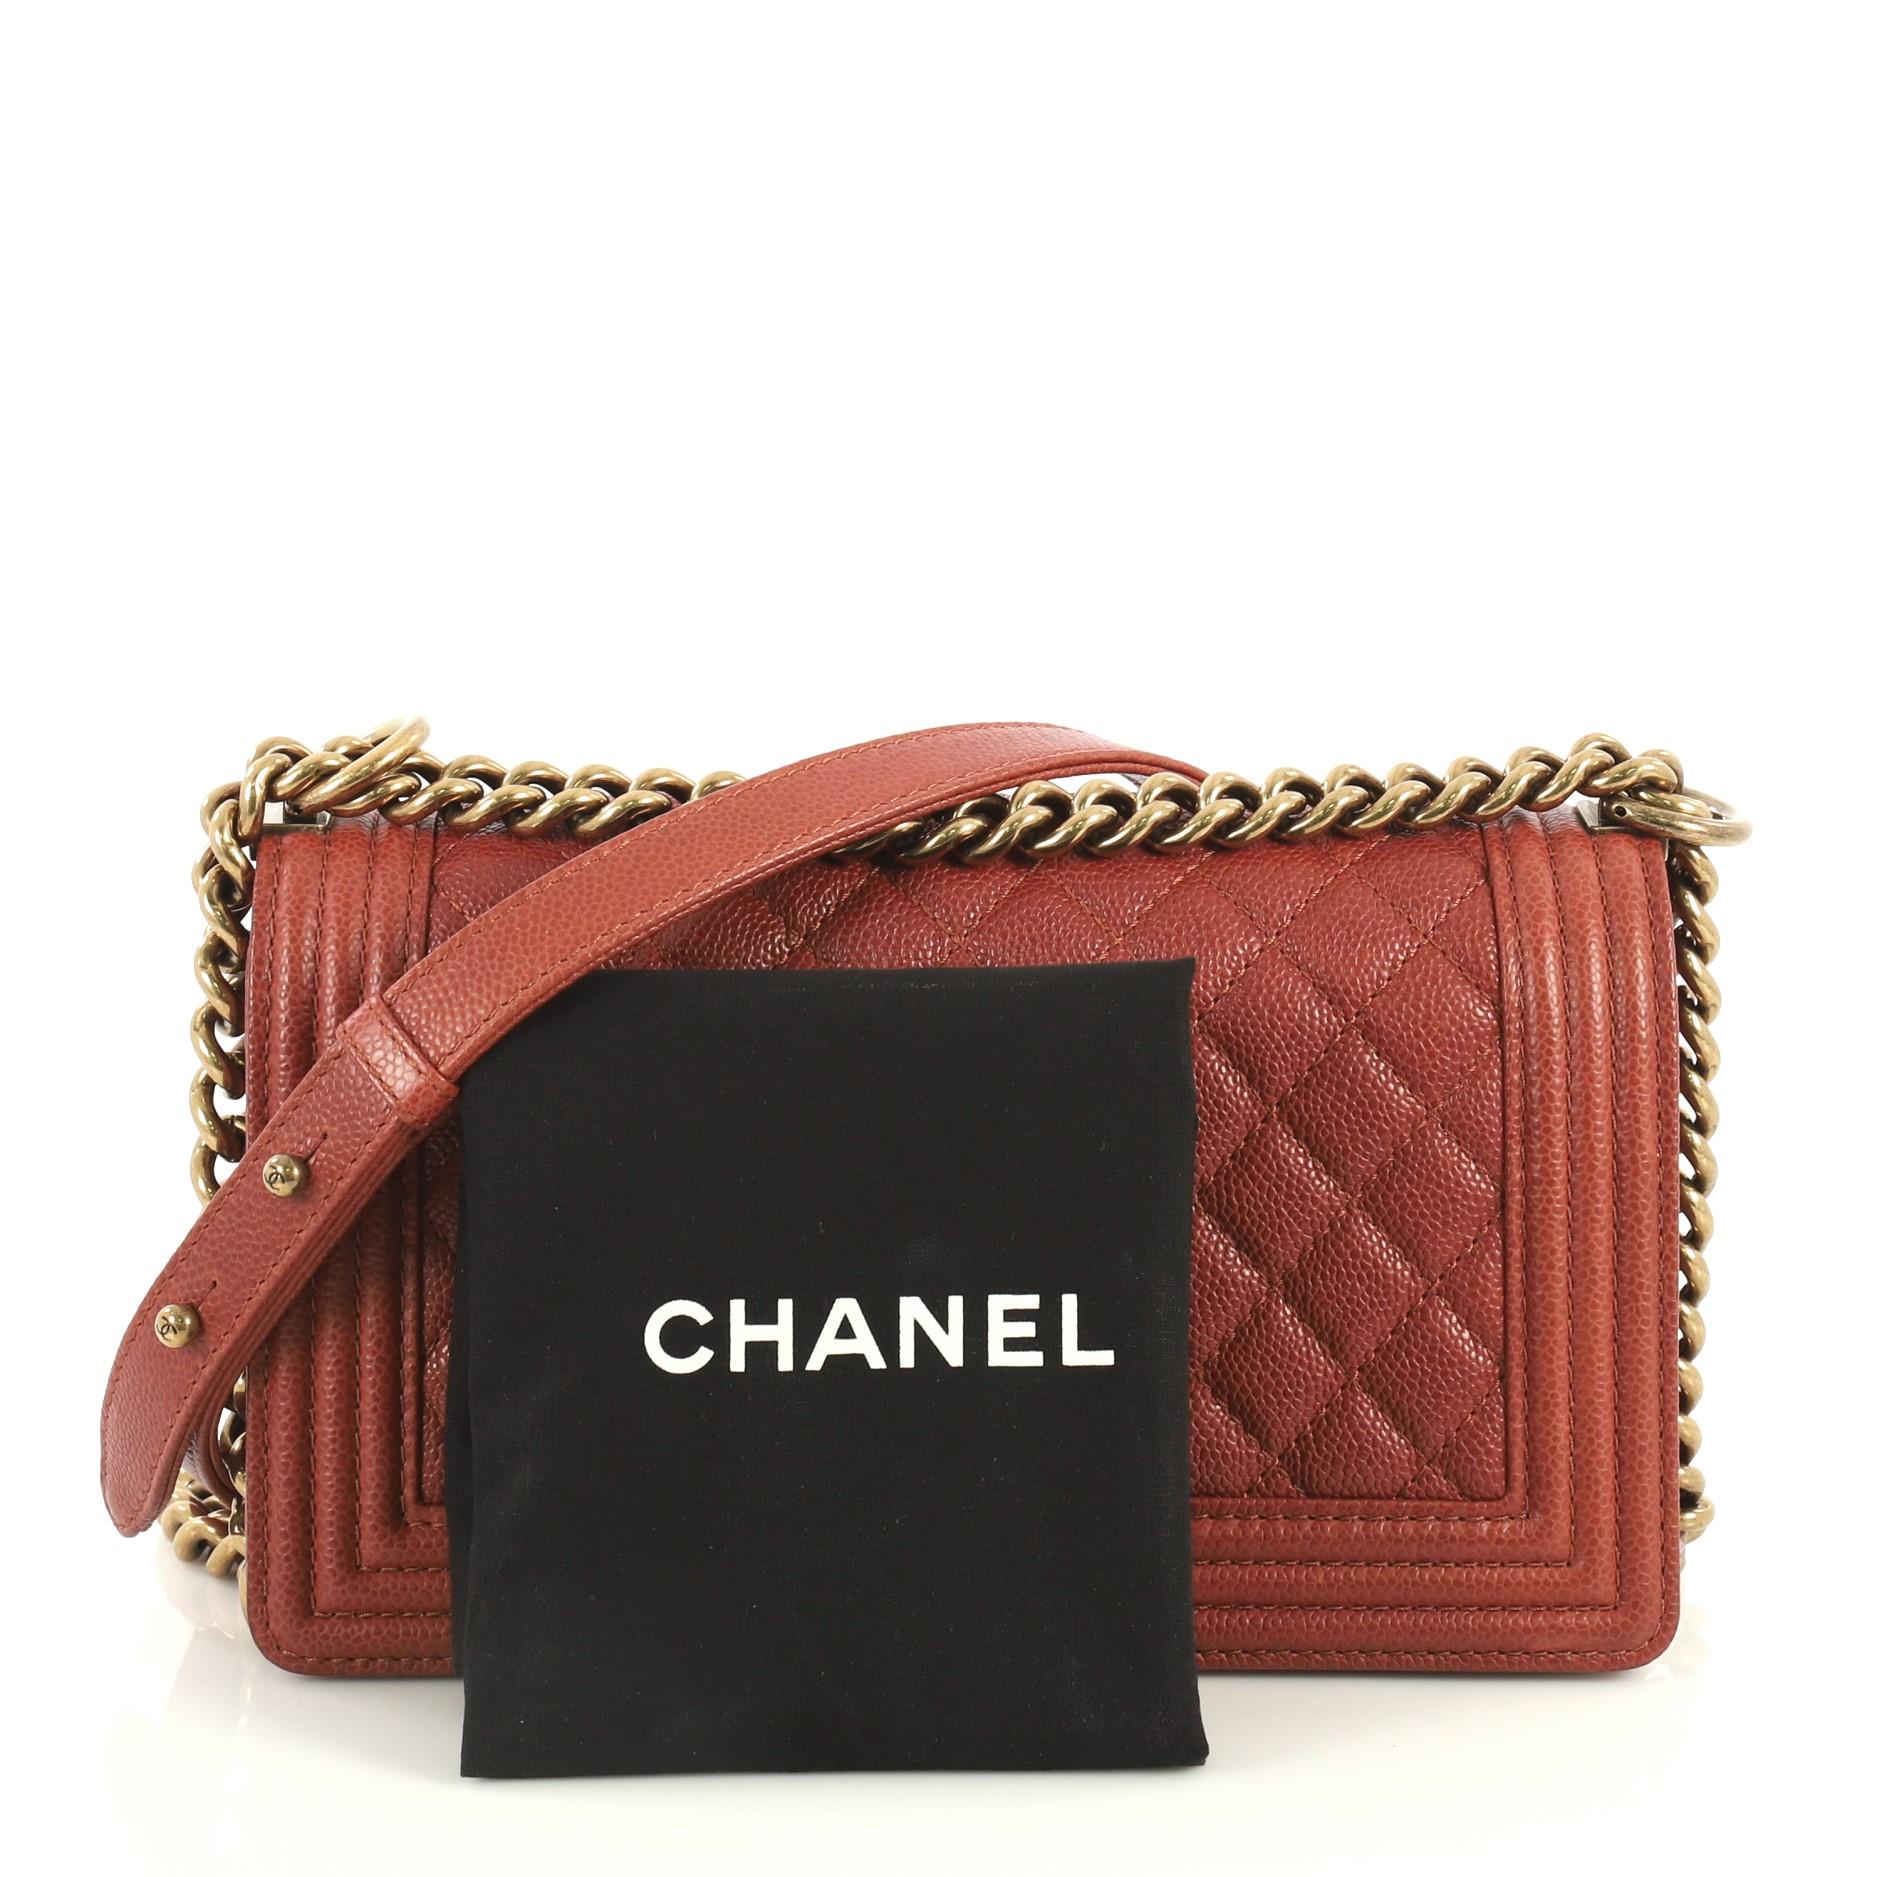 This Chanel Boy Flap Bag Quilted Caviar Old Medium, crafted from red quilted caviar leather, features chain link strap with leather shoulder pad and aged gold-tone hardware. Its CC Boy logo push-lock closure opens to a red fabric interior with slip